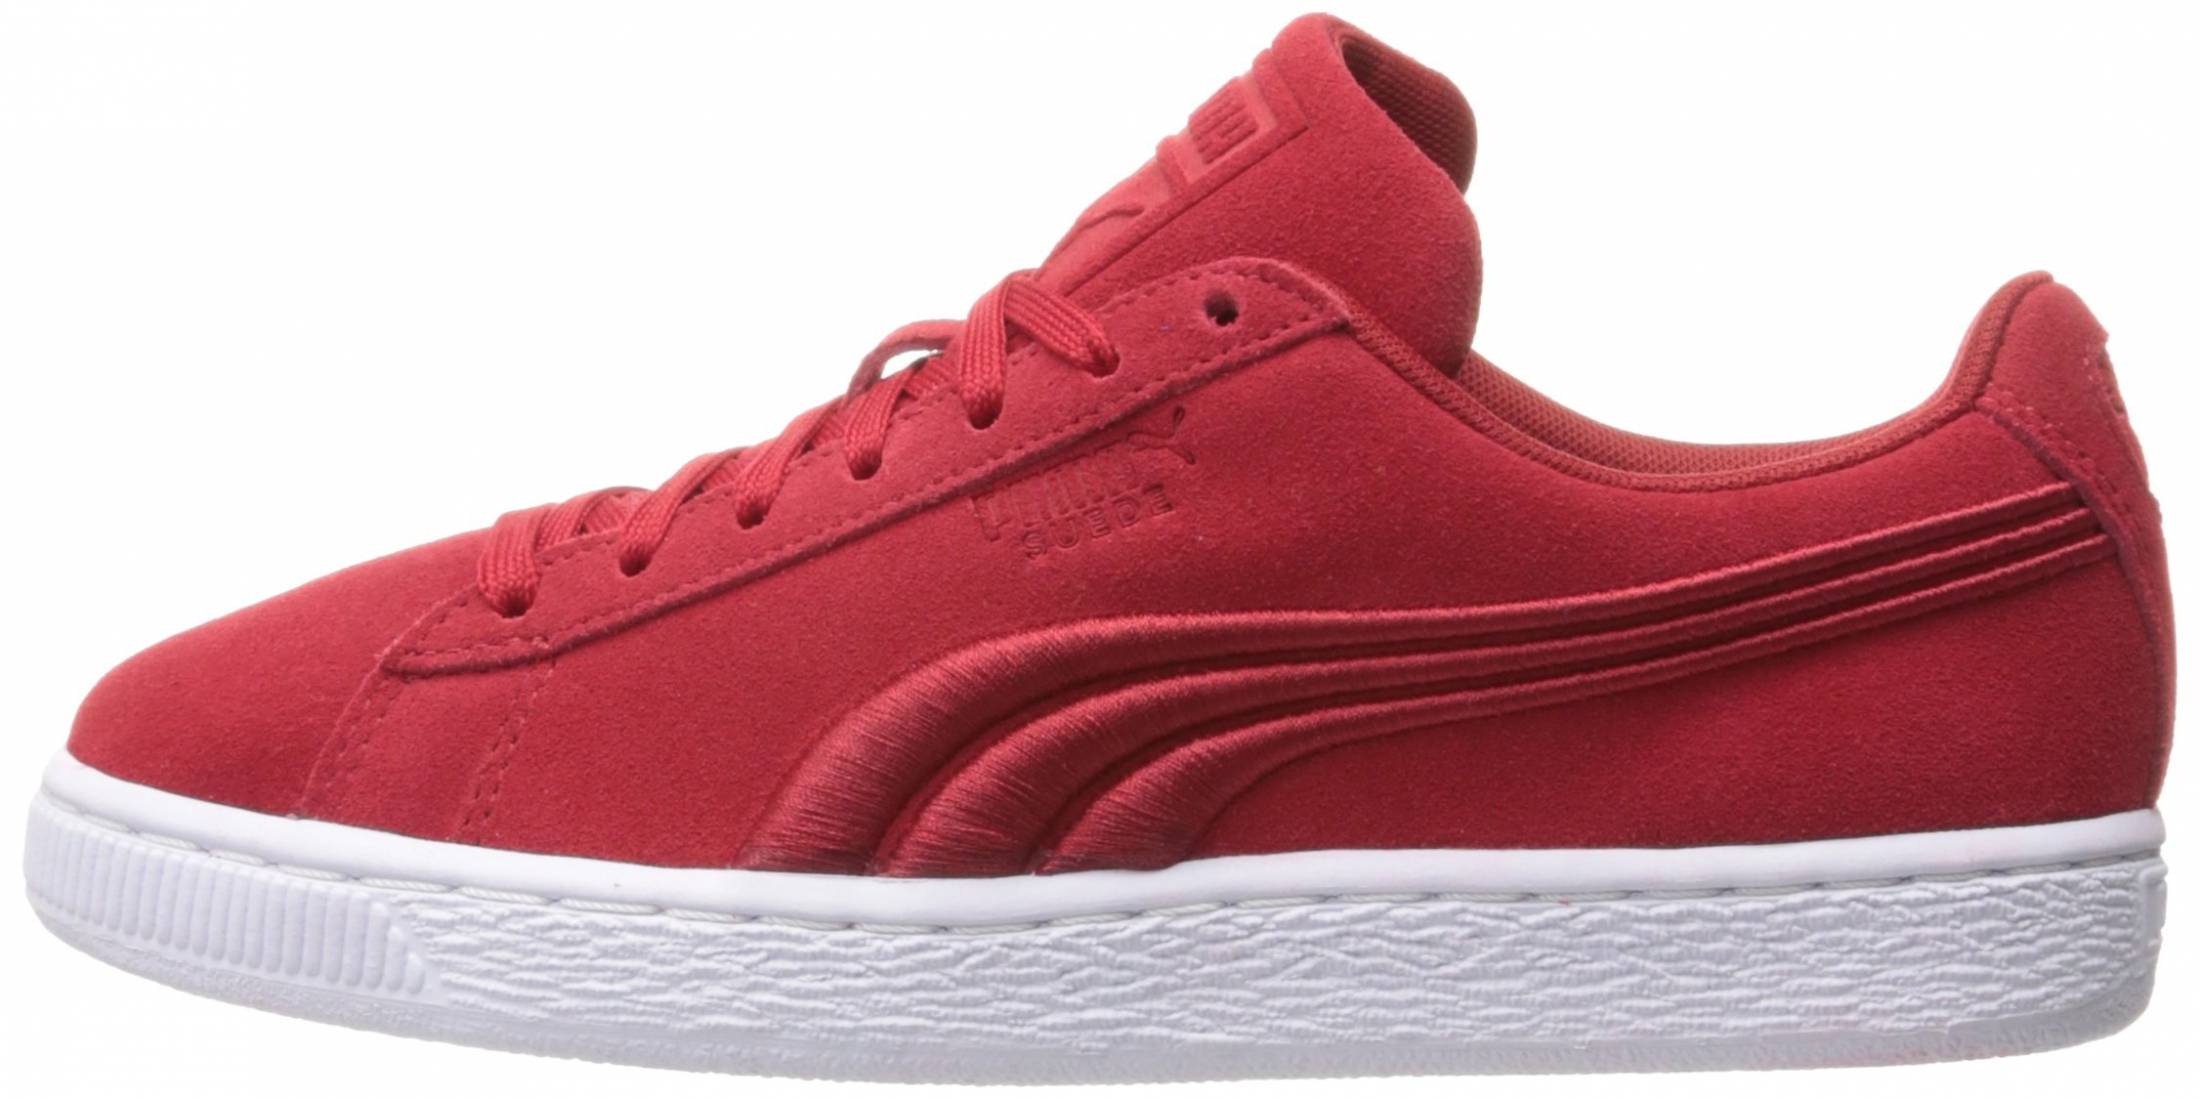 Only £34 + Review of Puma Suede Classic Badge | RunRepeat